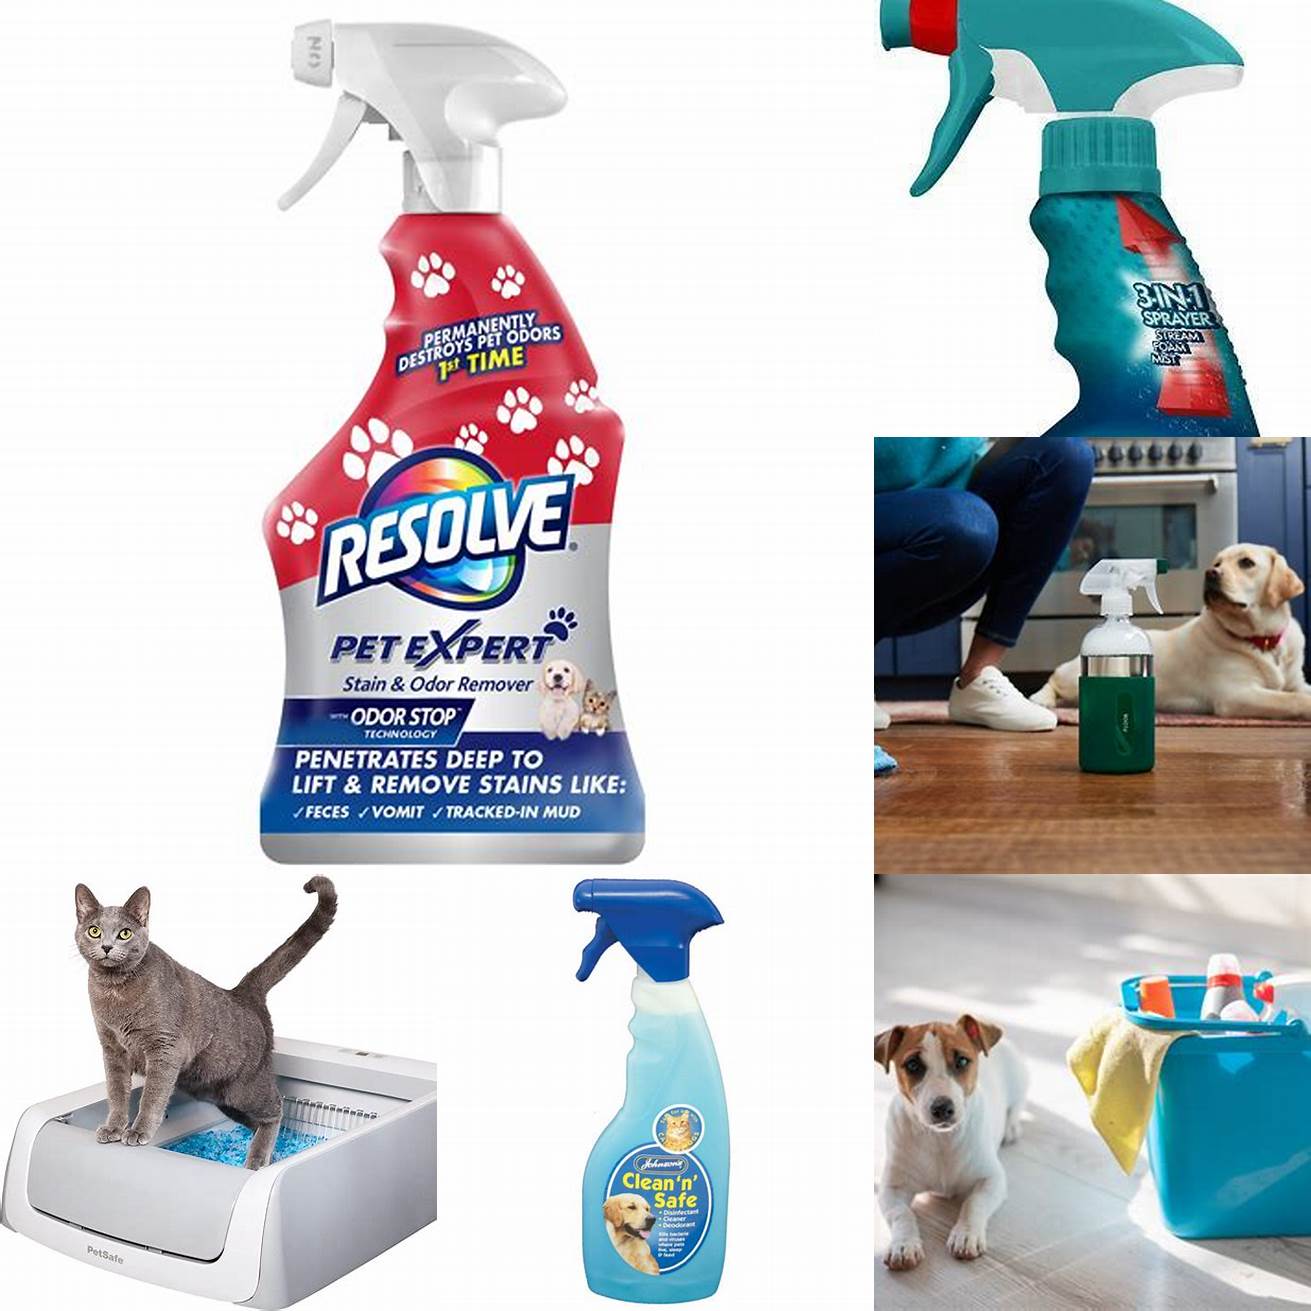 Apply a pet-safe cleaning solution to the affected area